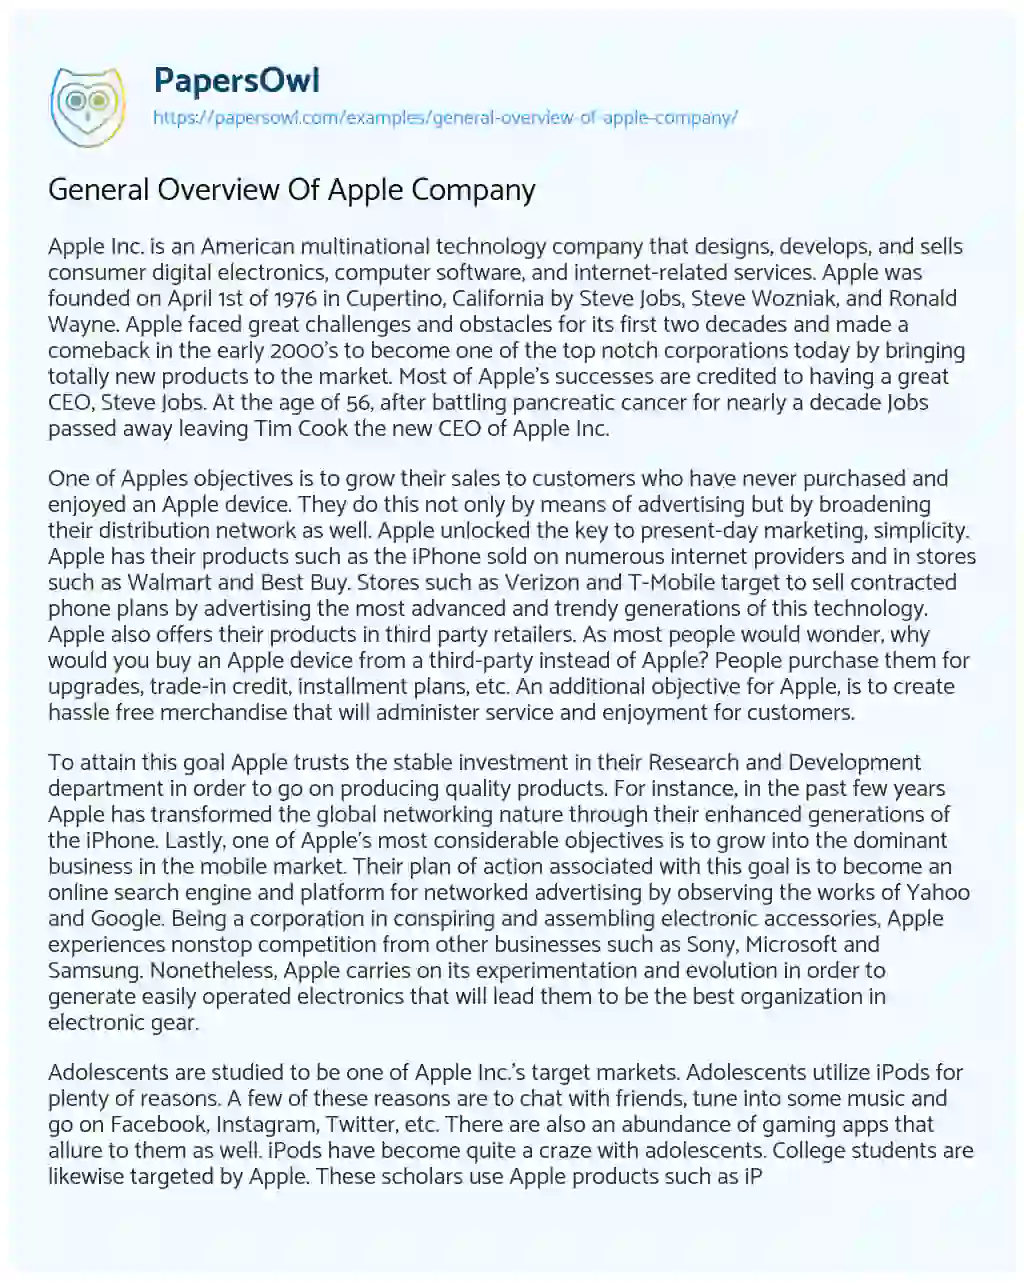 Essay on General Overview of Apple Company